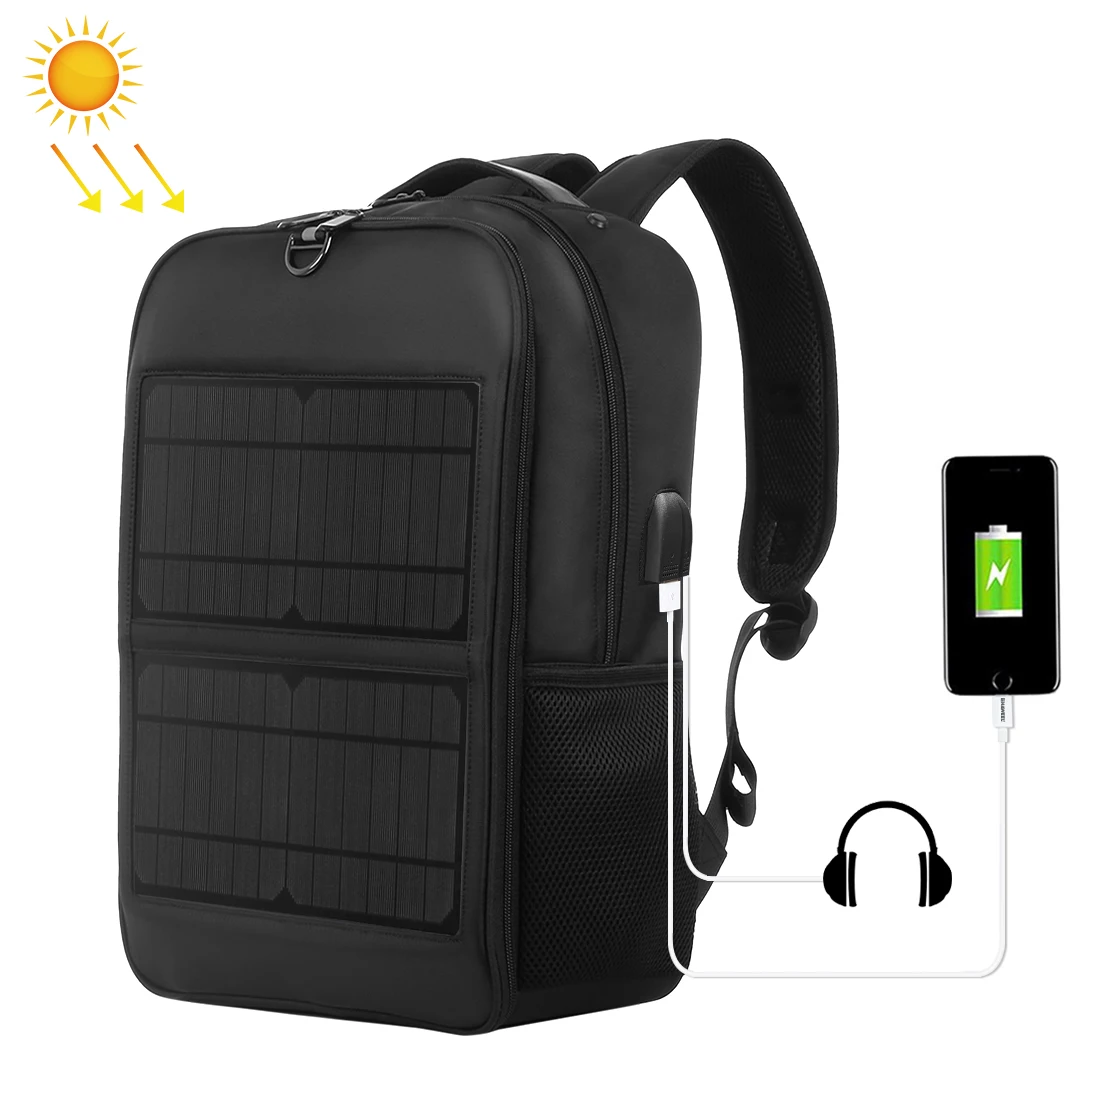 HAWEEL 14W Solar Panel Power Backpack Laptop Bag with Handle and 5V / 2.1A Max USB Charging Port